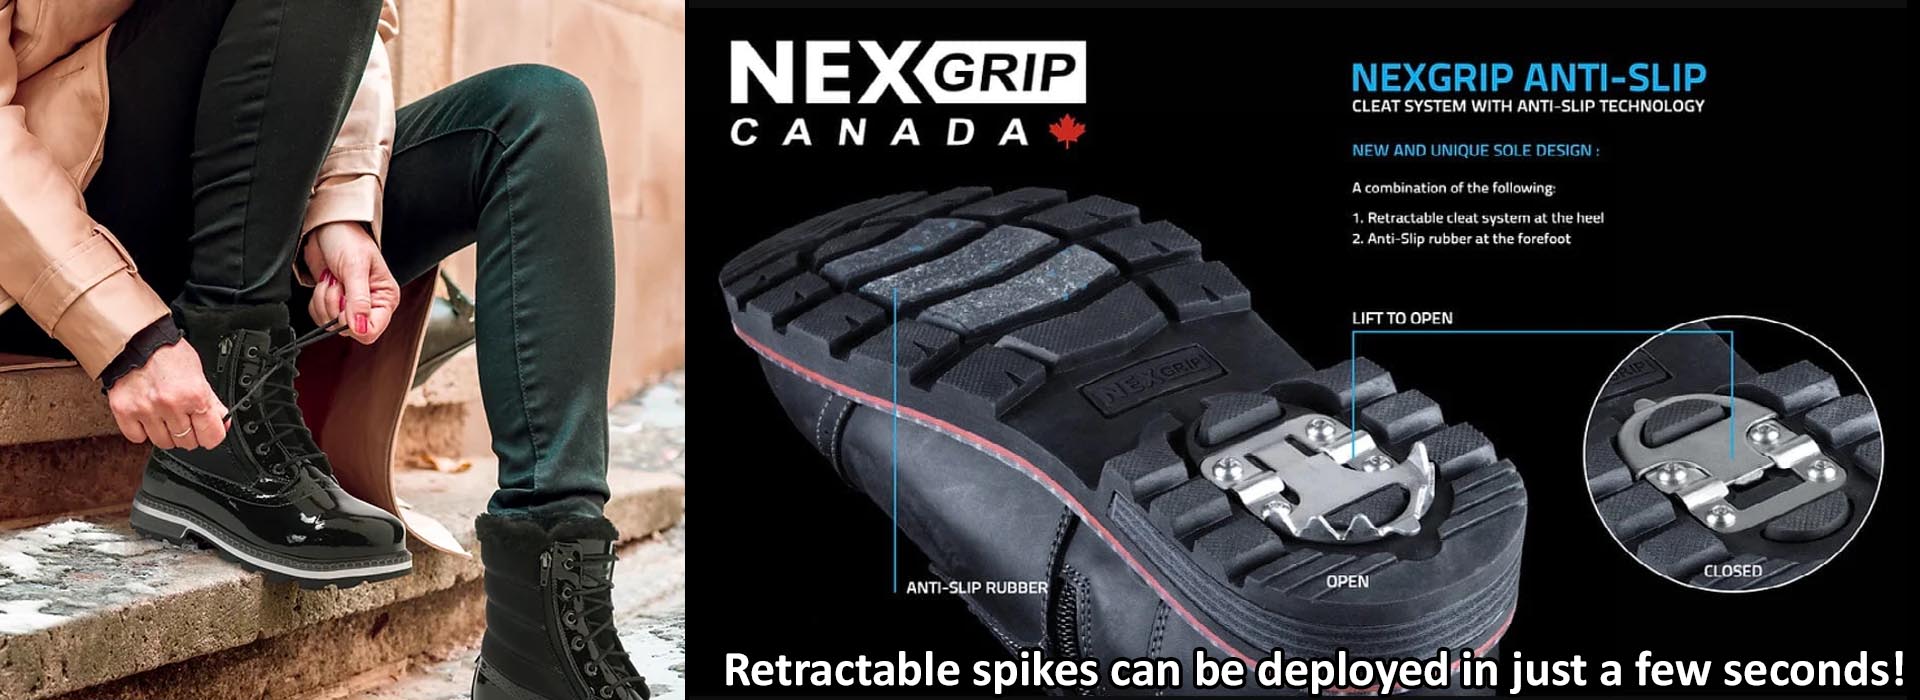 Nexgrip Canada - Winter Boots - Retractable spikes can be deployed in just a few seconds!